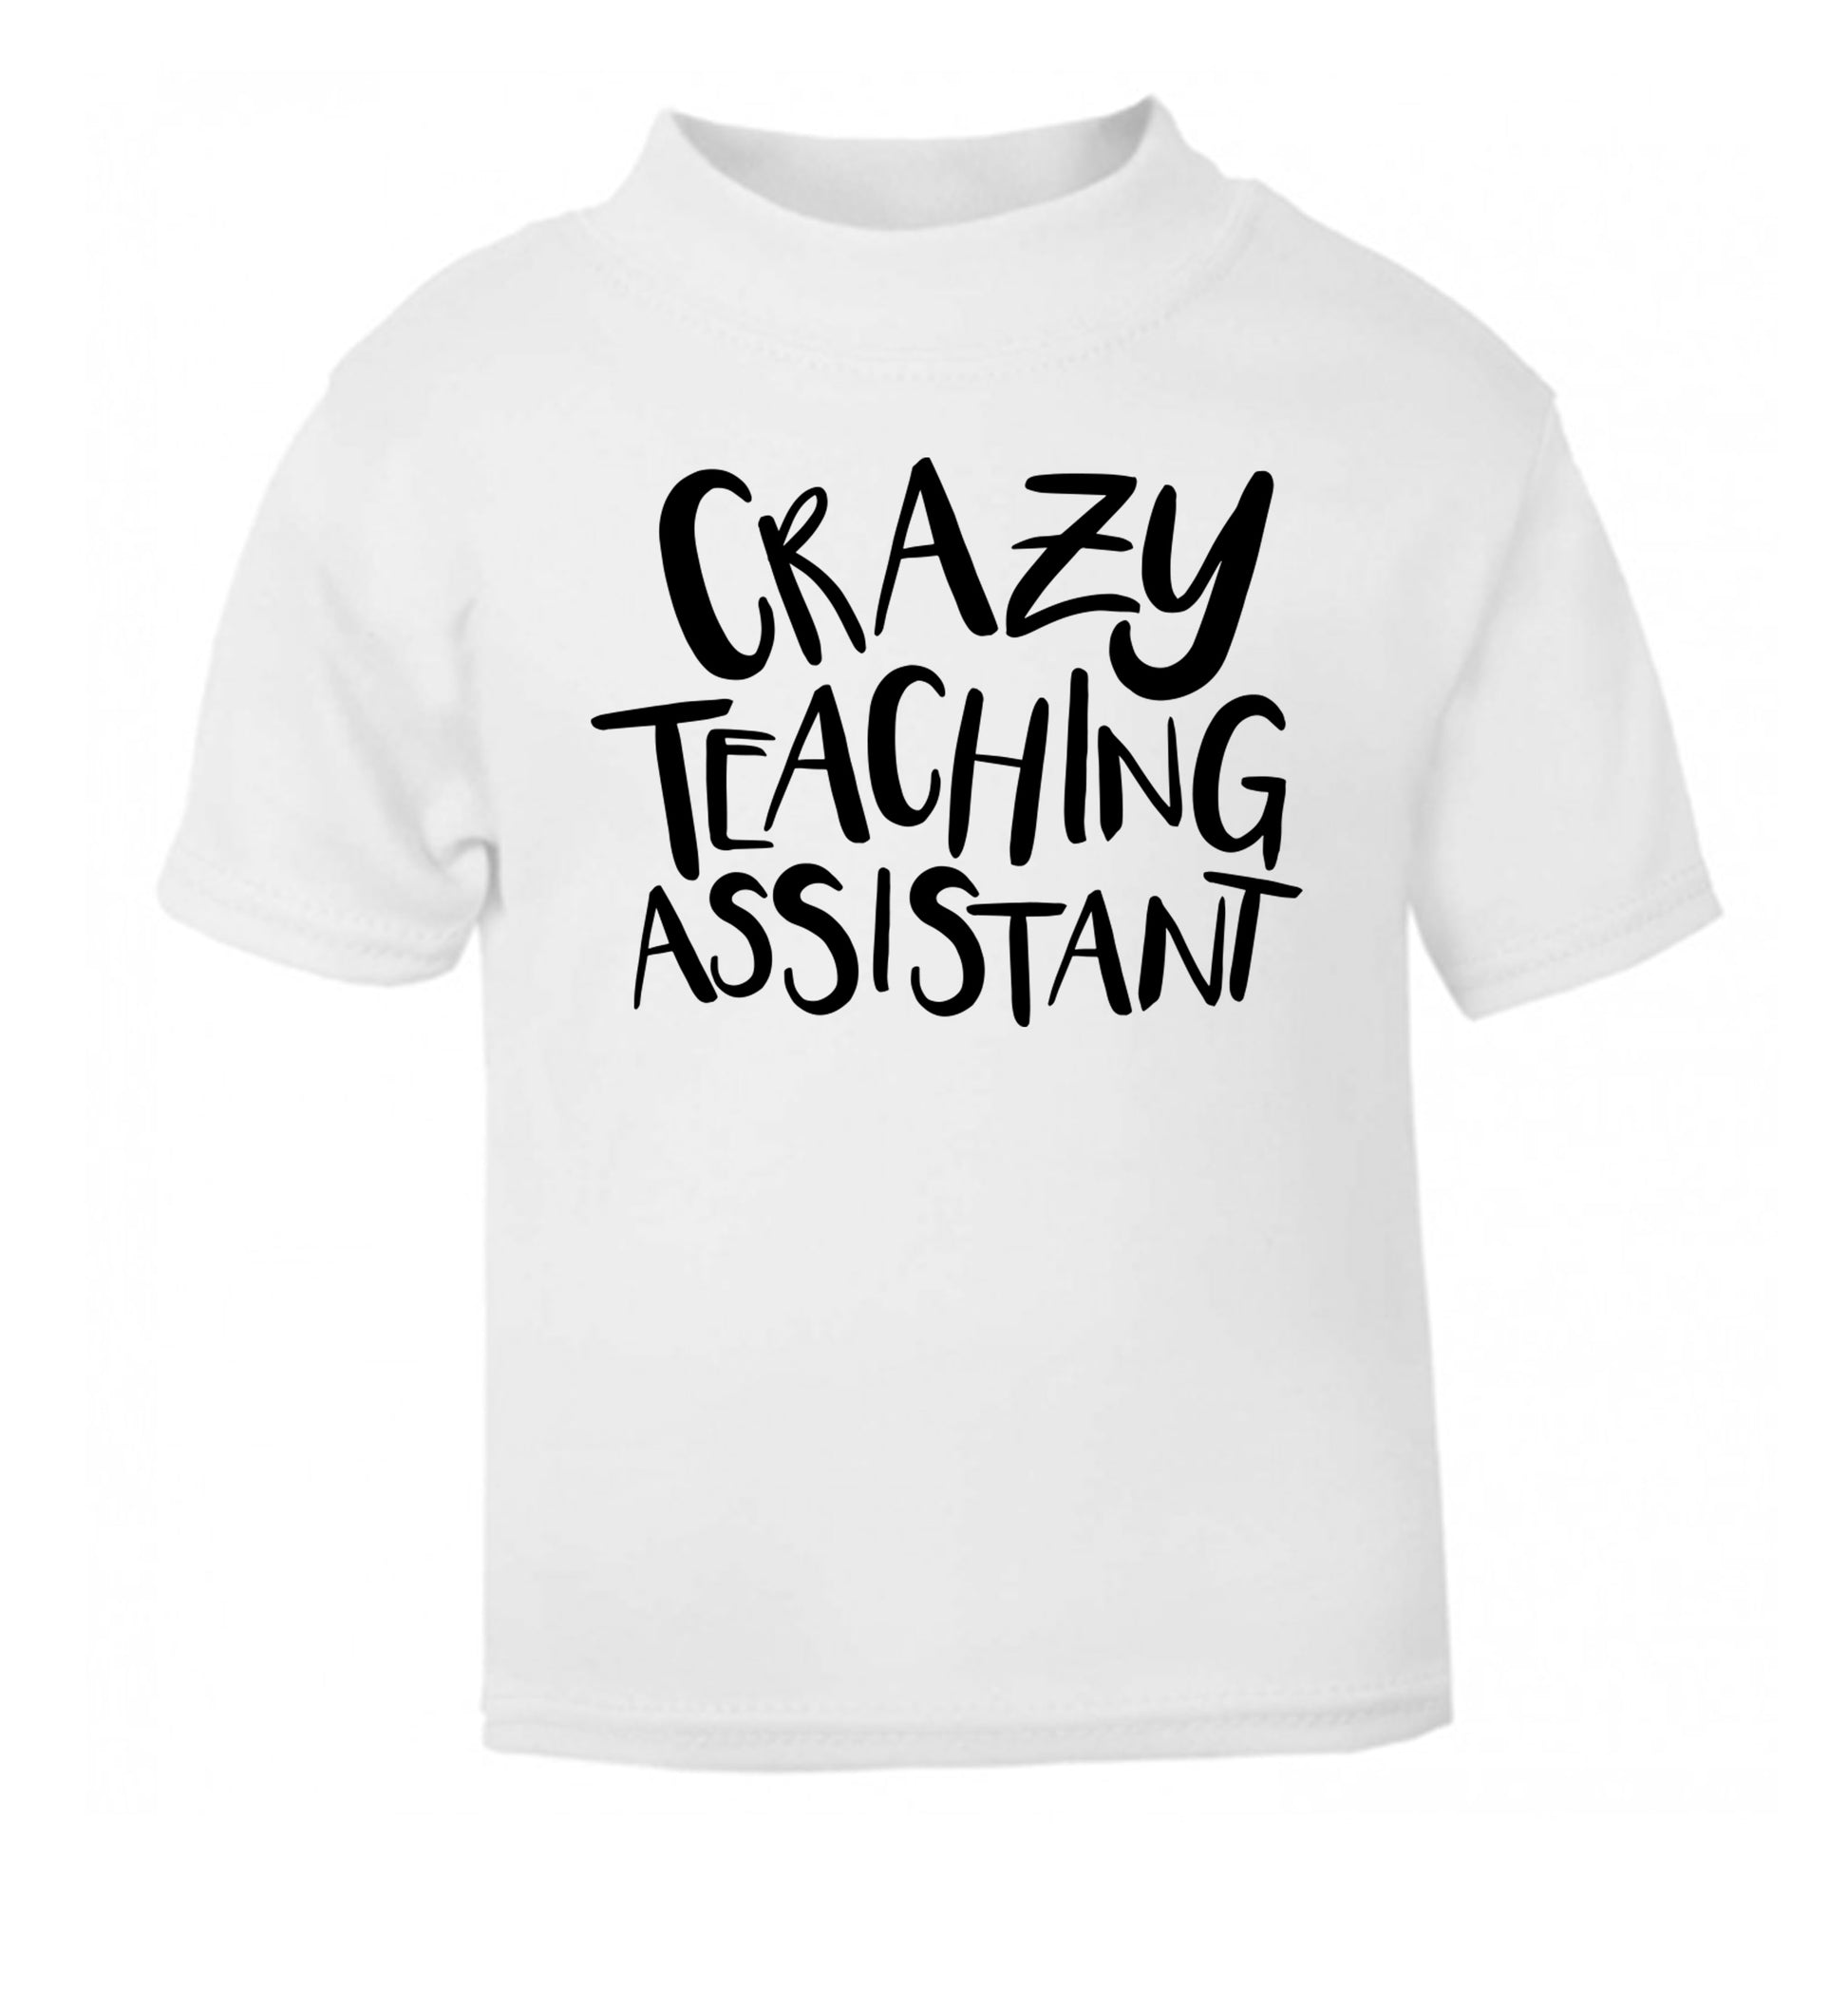 Crazy Teaching Assistant white Baby Toddler Tshirt 2 Years